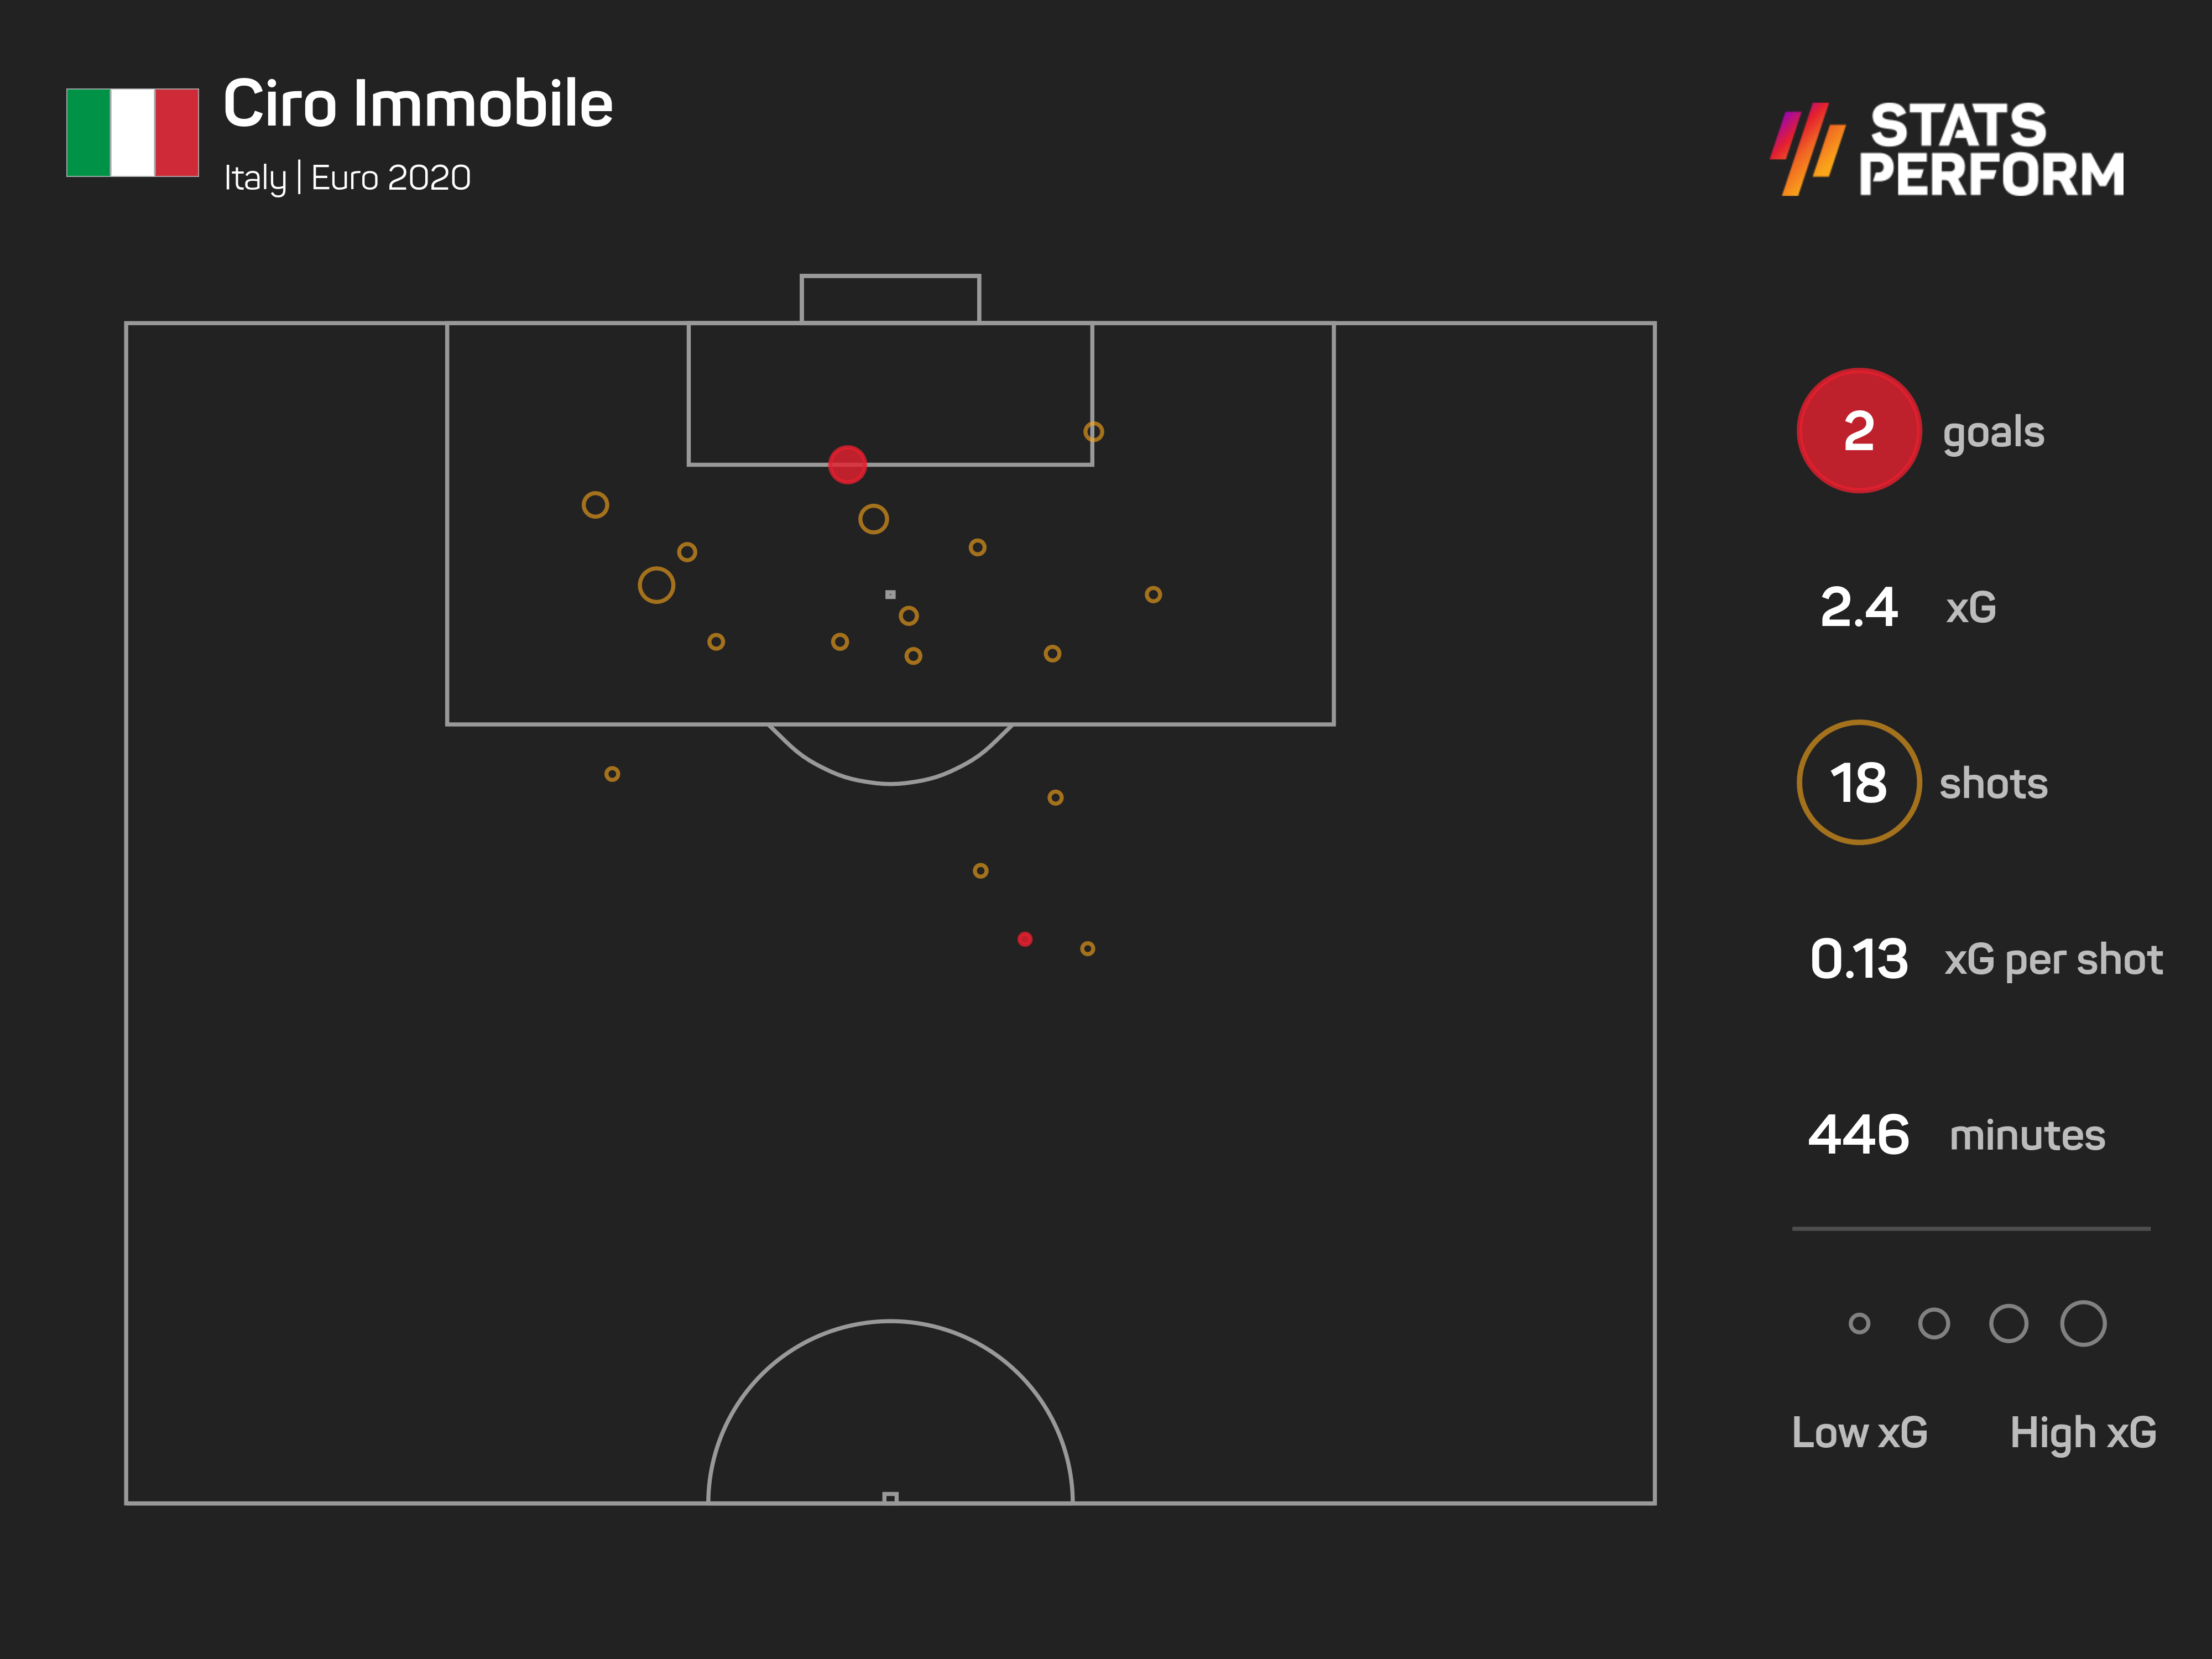 Ciro Immobile only hit the target three times